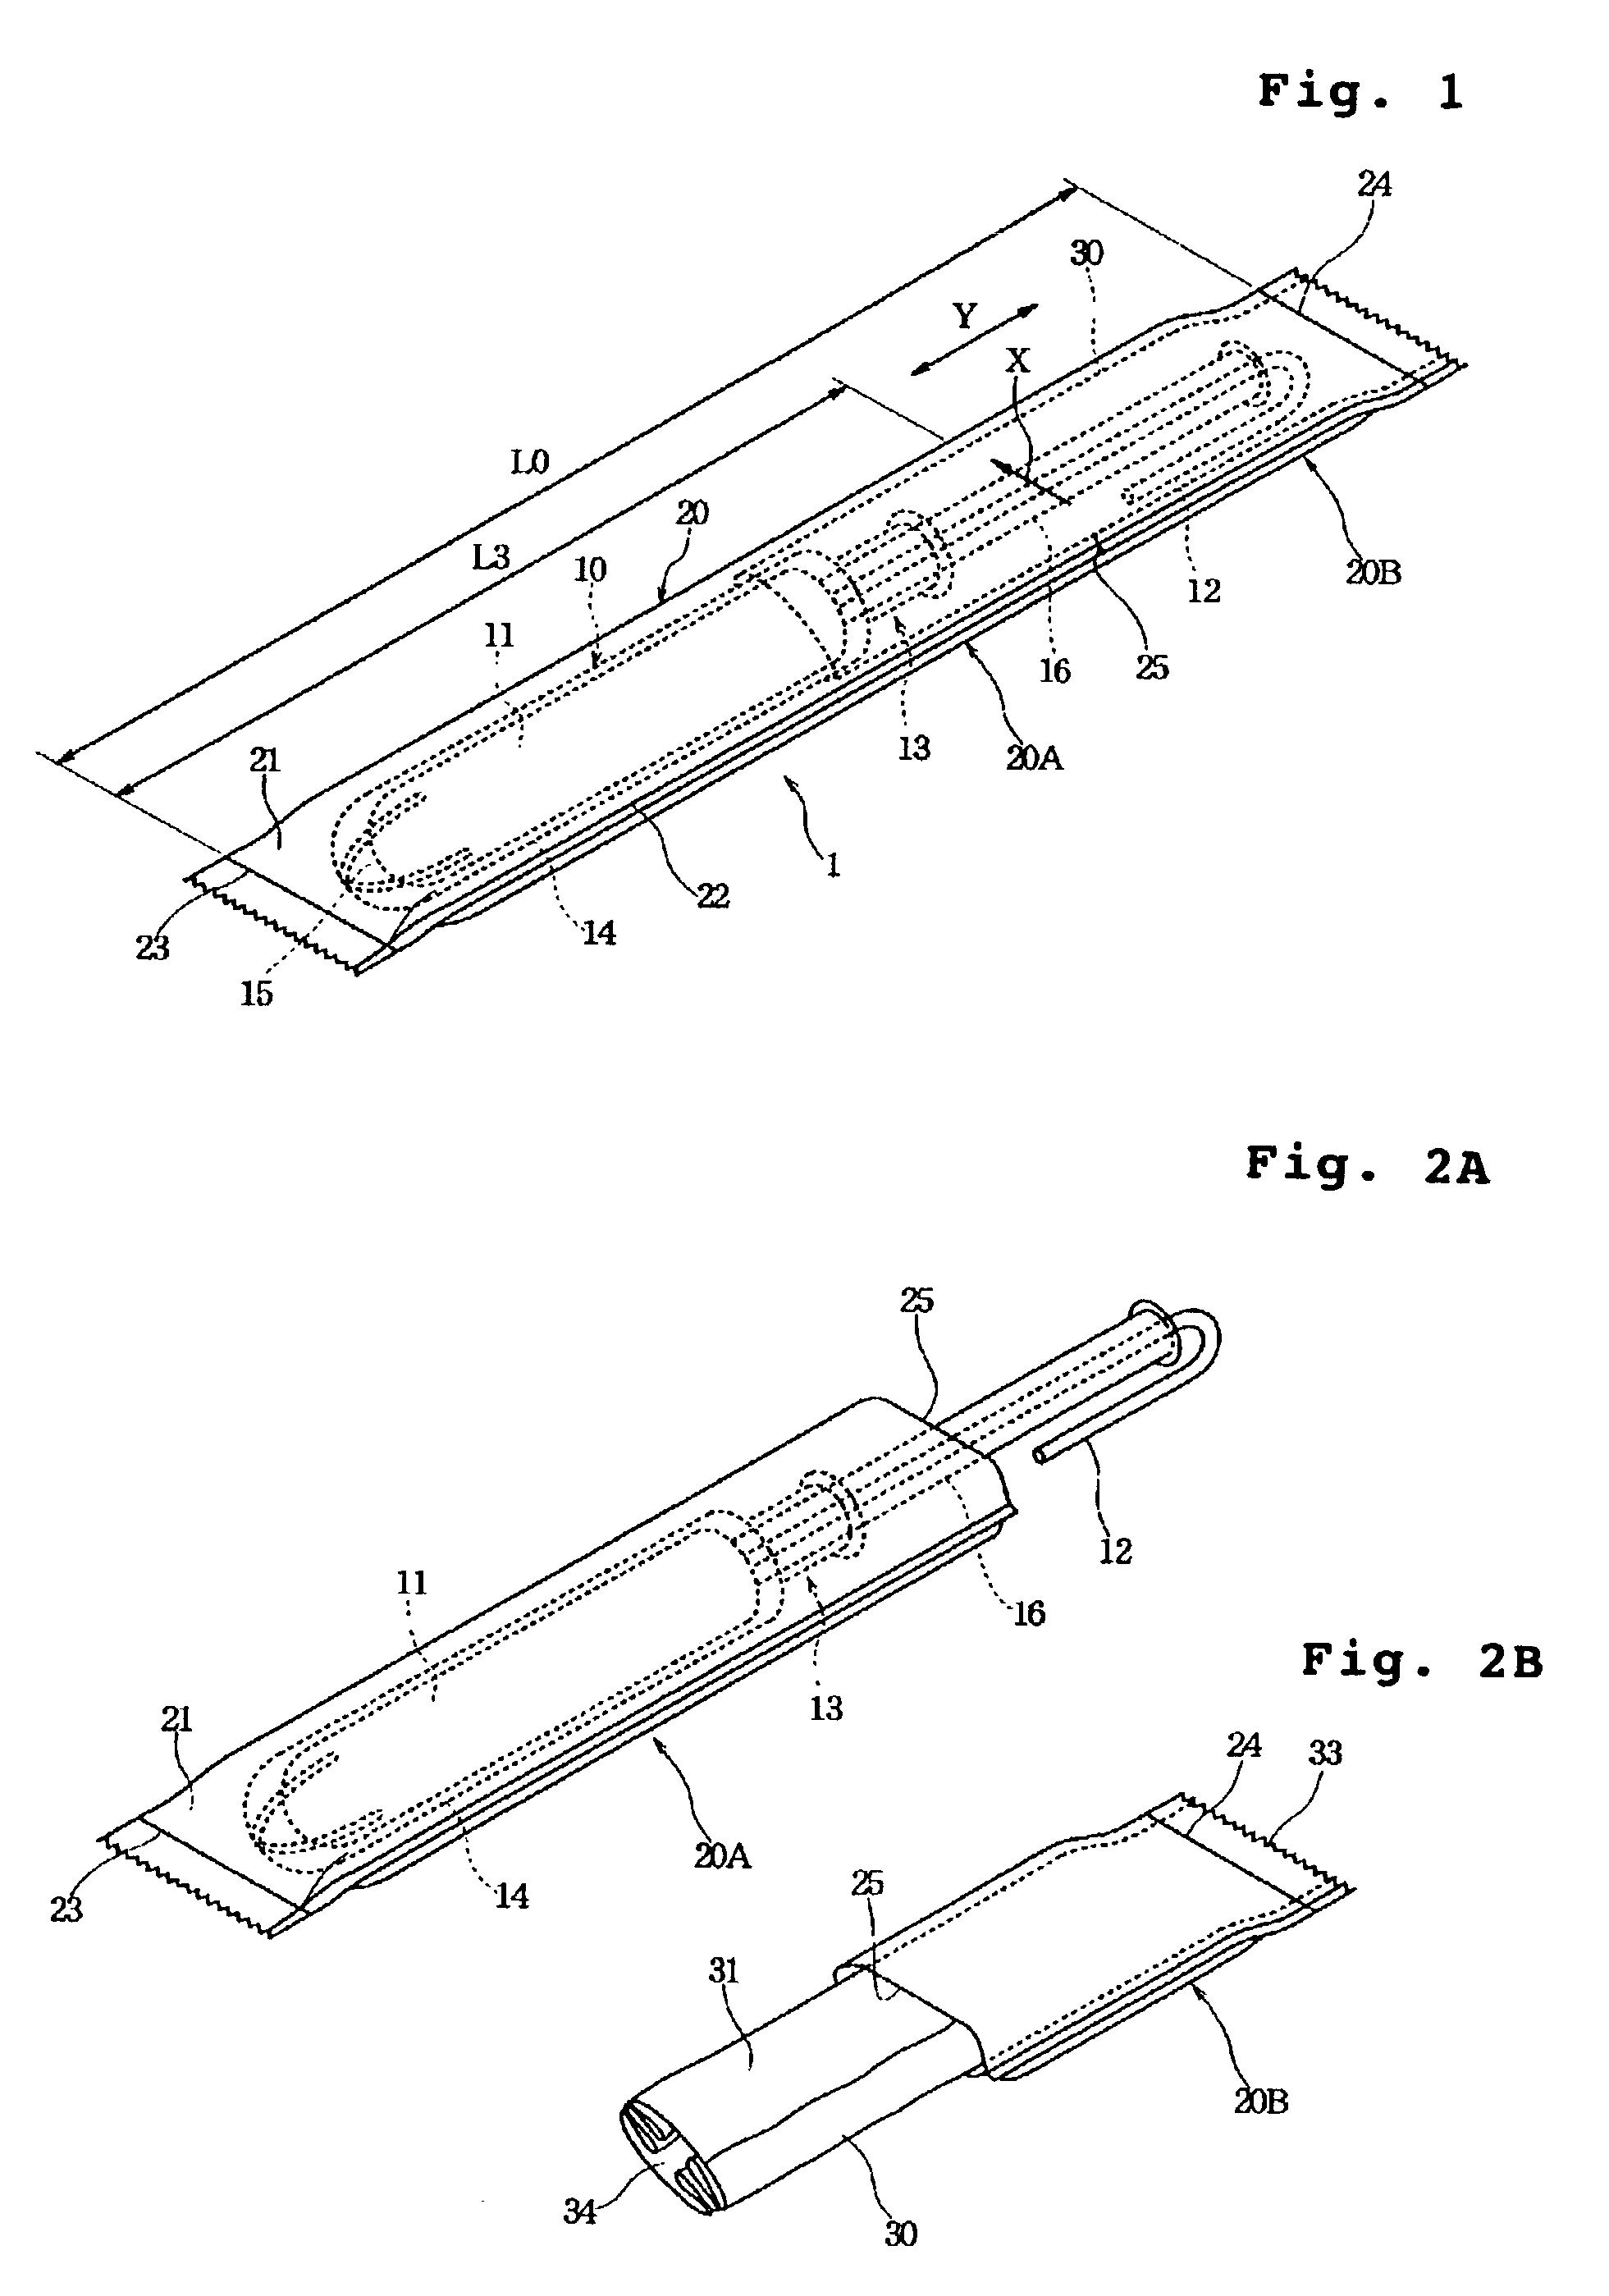 Individual package of body fluid absorbent article